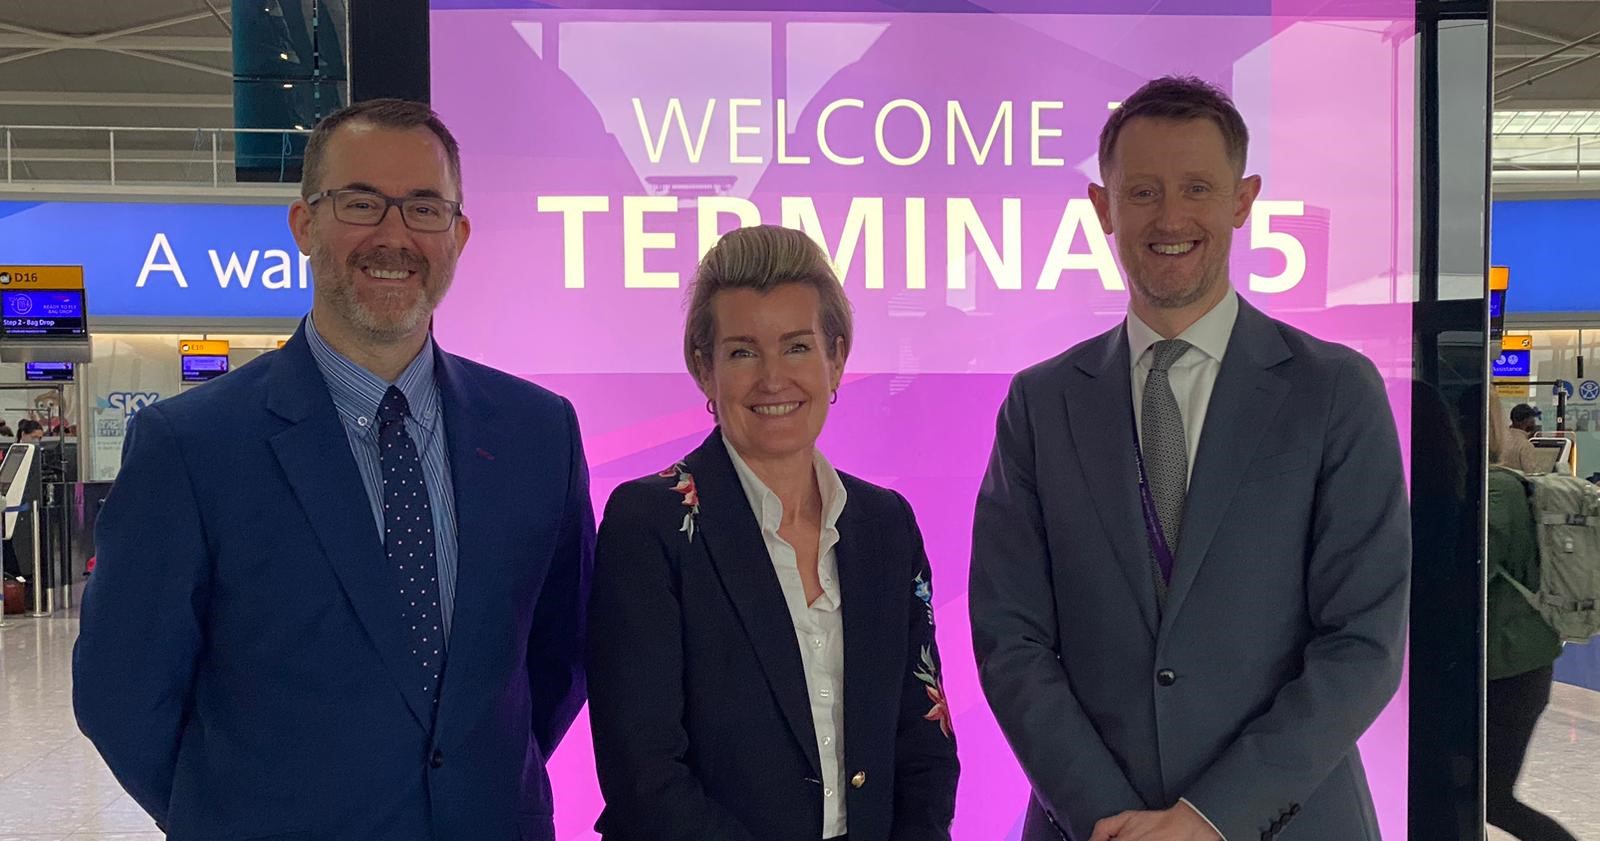 Craig Beaumont, Chief of External Affairs at the Federation of Small Businesses, Shevaun Haviland, Director General of the British Chambers of Commerce, and Dale Reeson, Director of Operations at Heathrow Airport. Stand side by side in front of pic neon display board at Heathrow's Terminal 5.